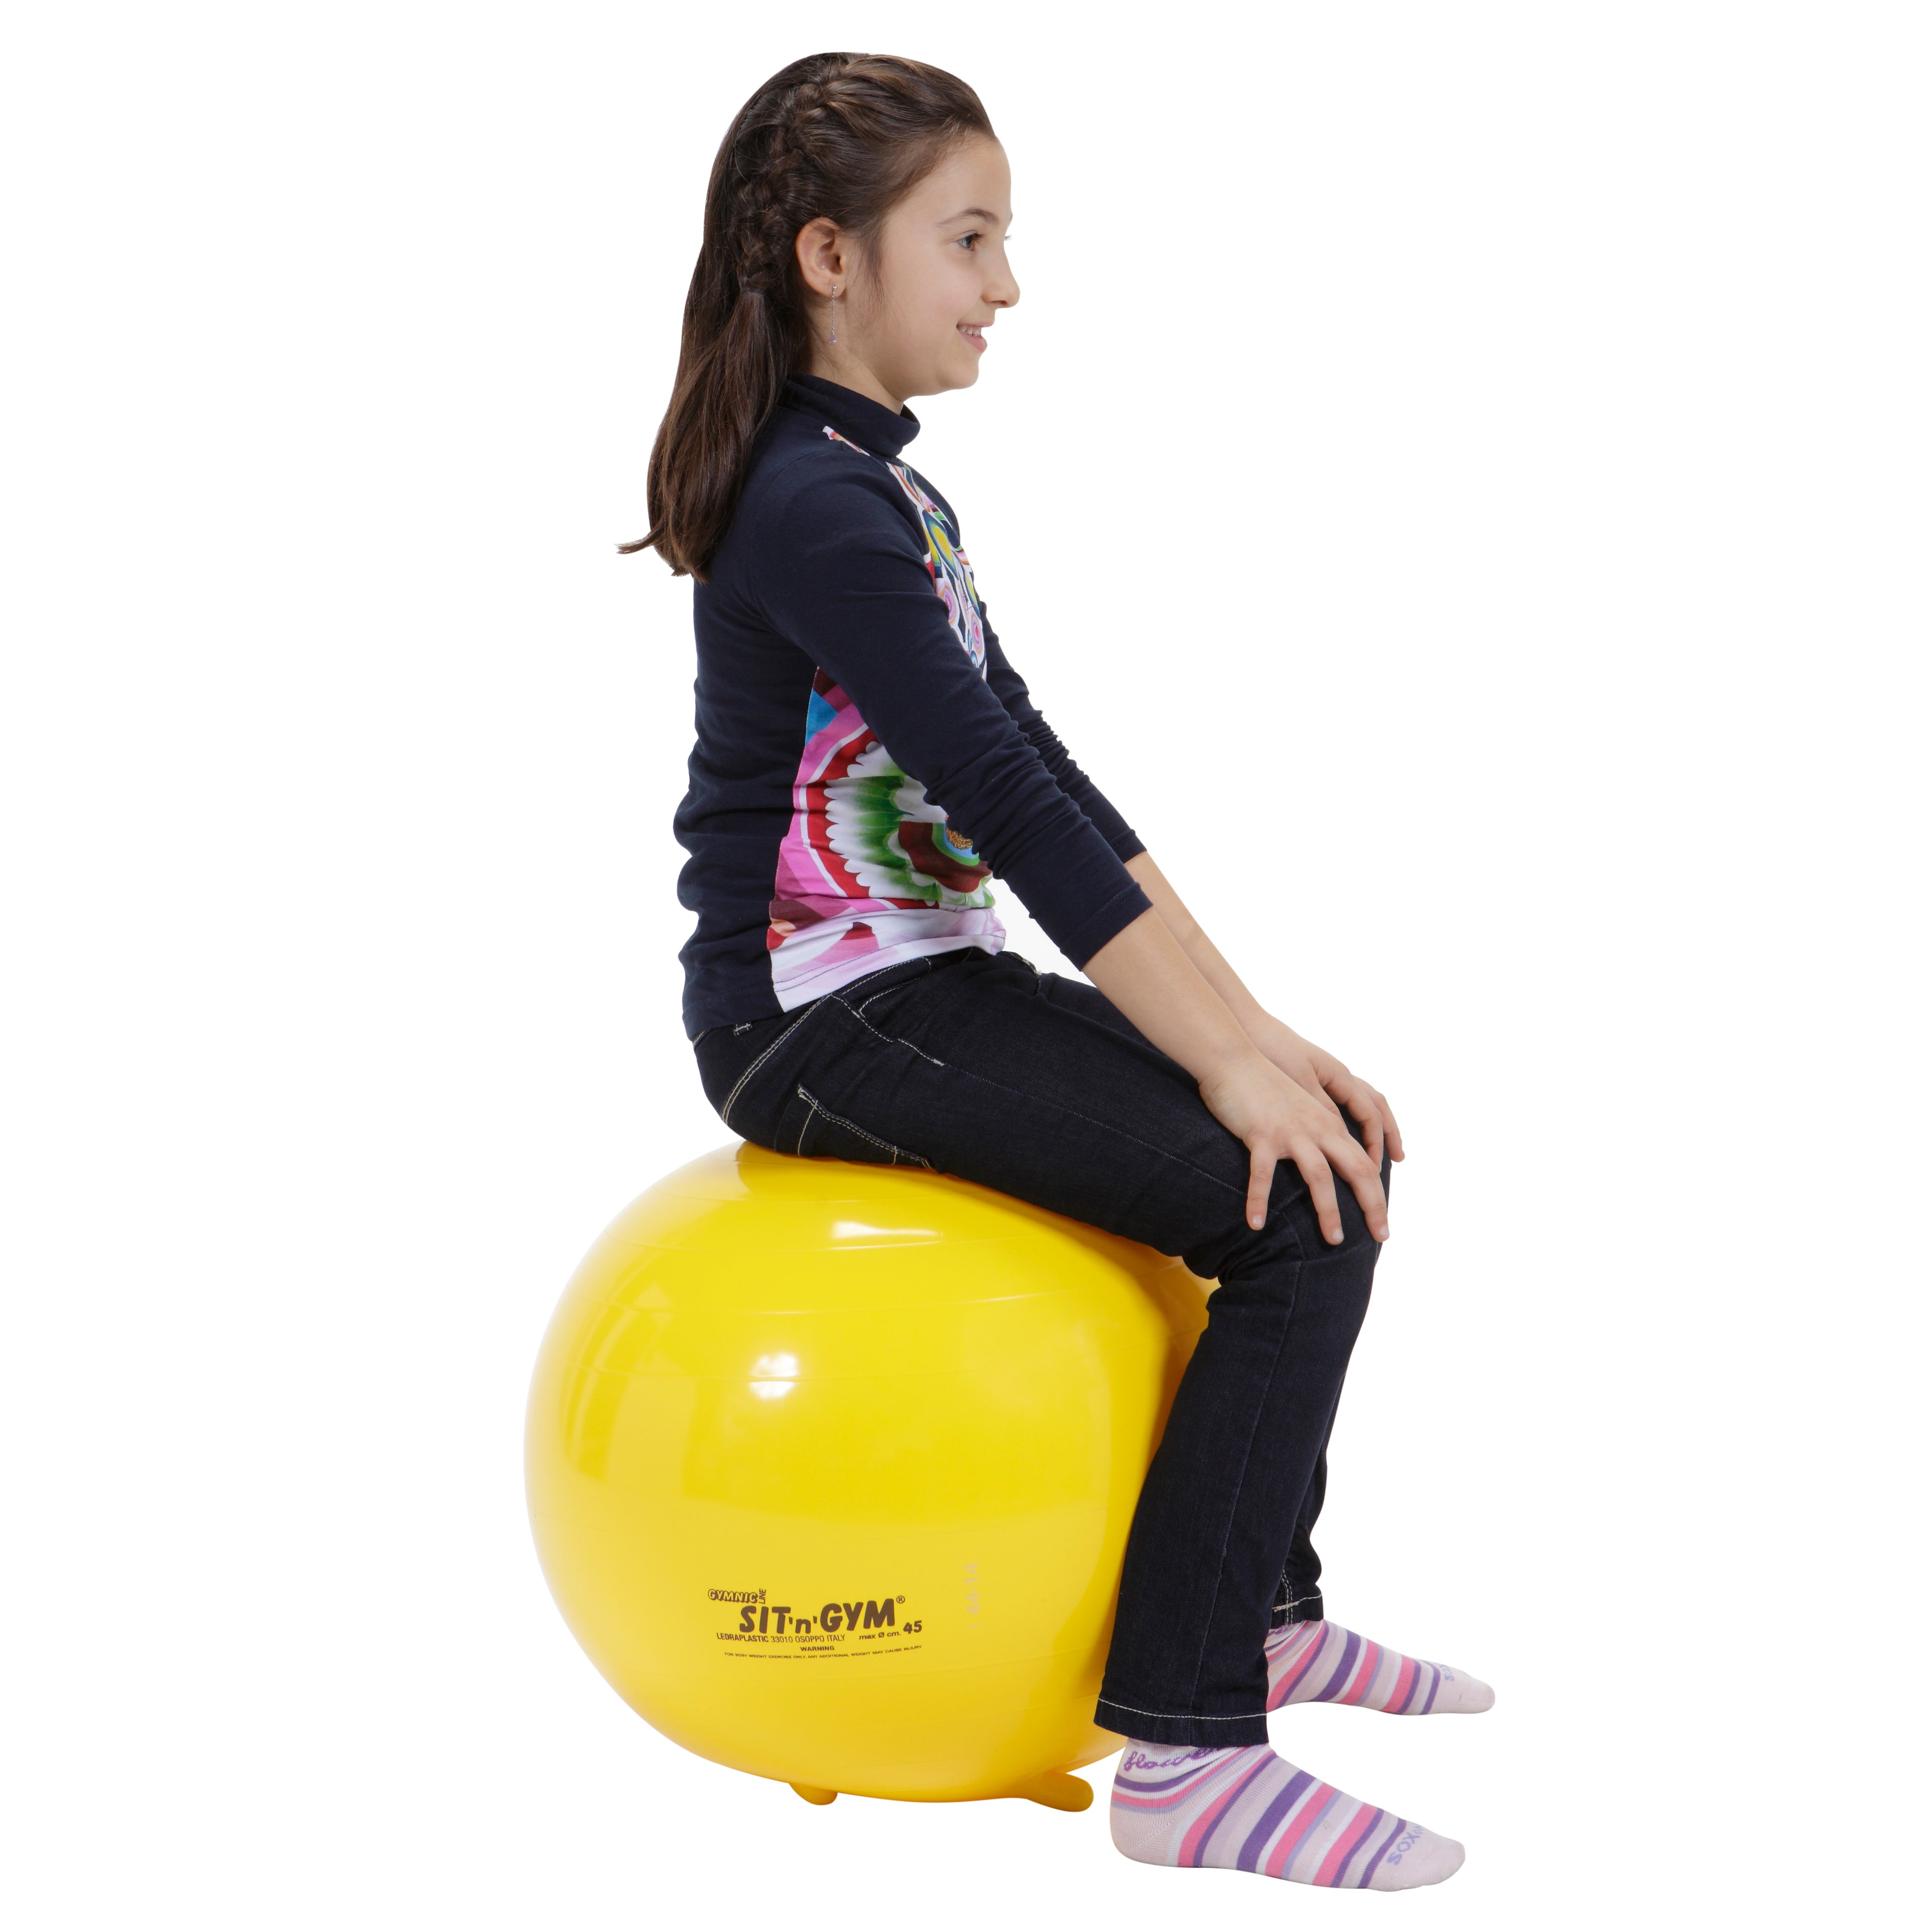 The Sit’n’Gym Jr. ball is designed for children and is widely used in primary schools. It provides the beneficial effects of a correct posture through dynamic sitting and increases the child’s attention span and concentration. Its small feet prevent the ball from rolling away.